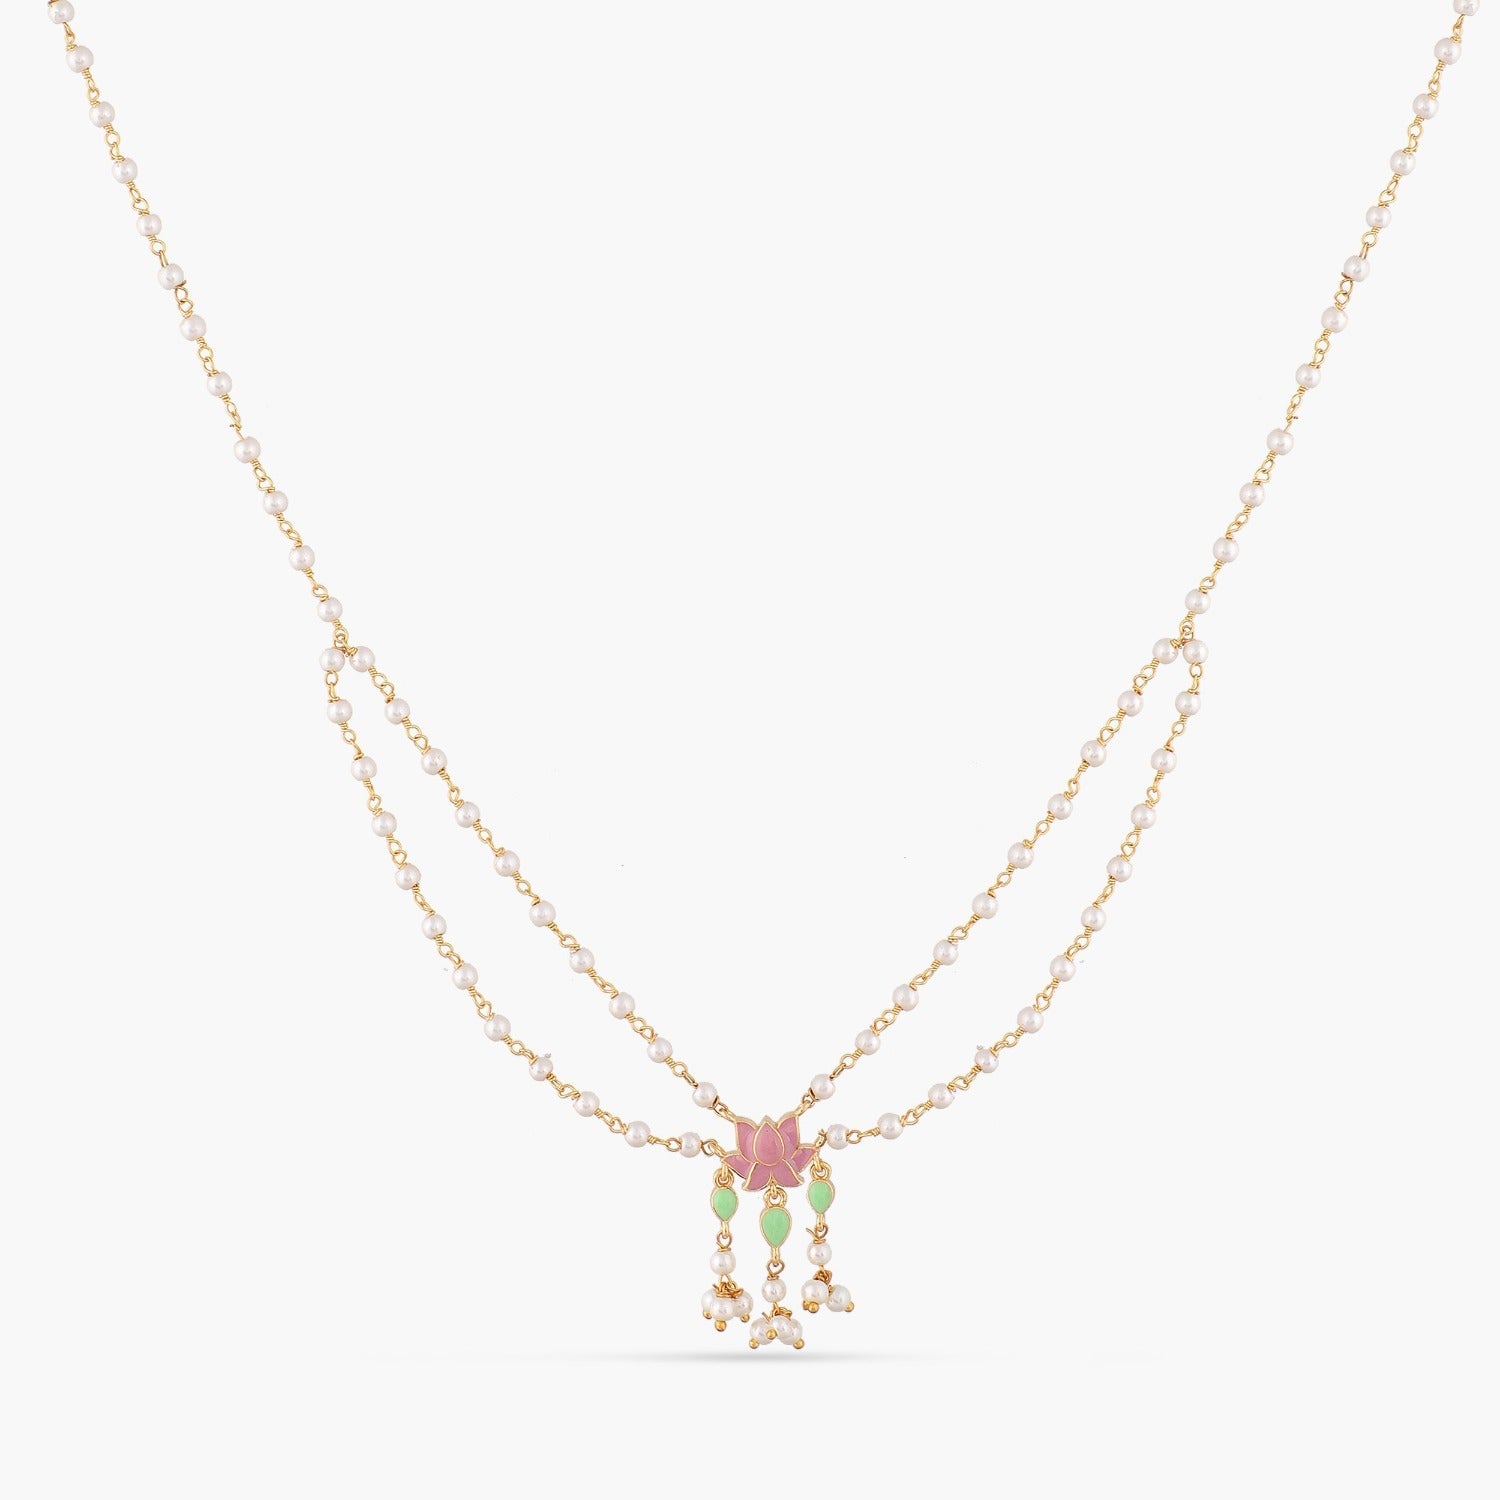 Buy Jalaja Delicate Pearl Chain Necklace